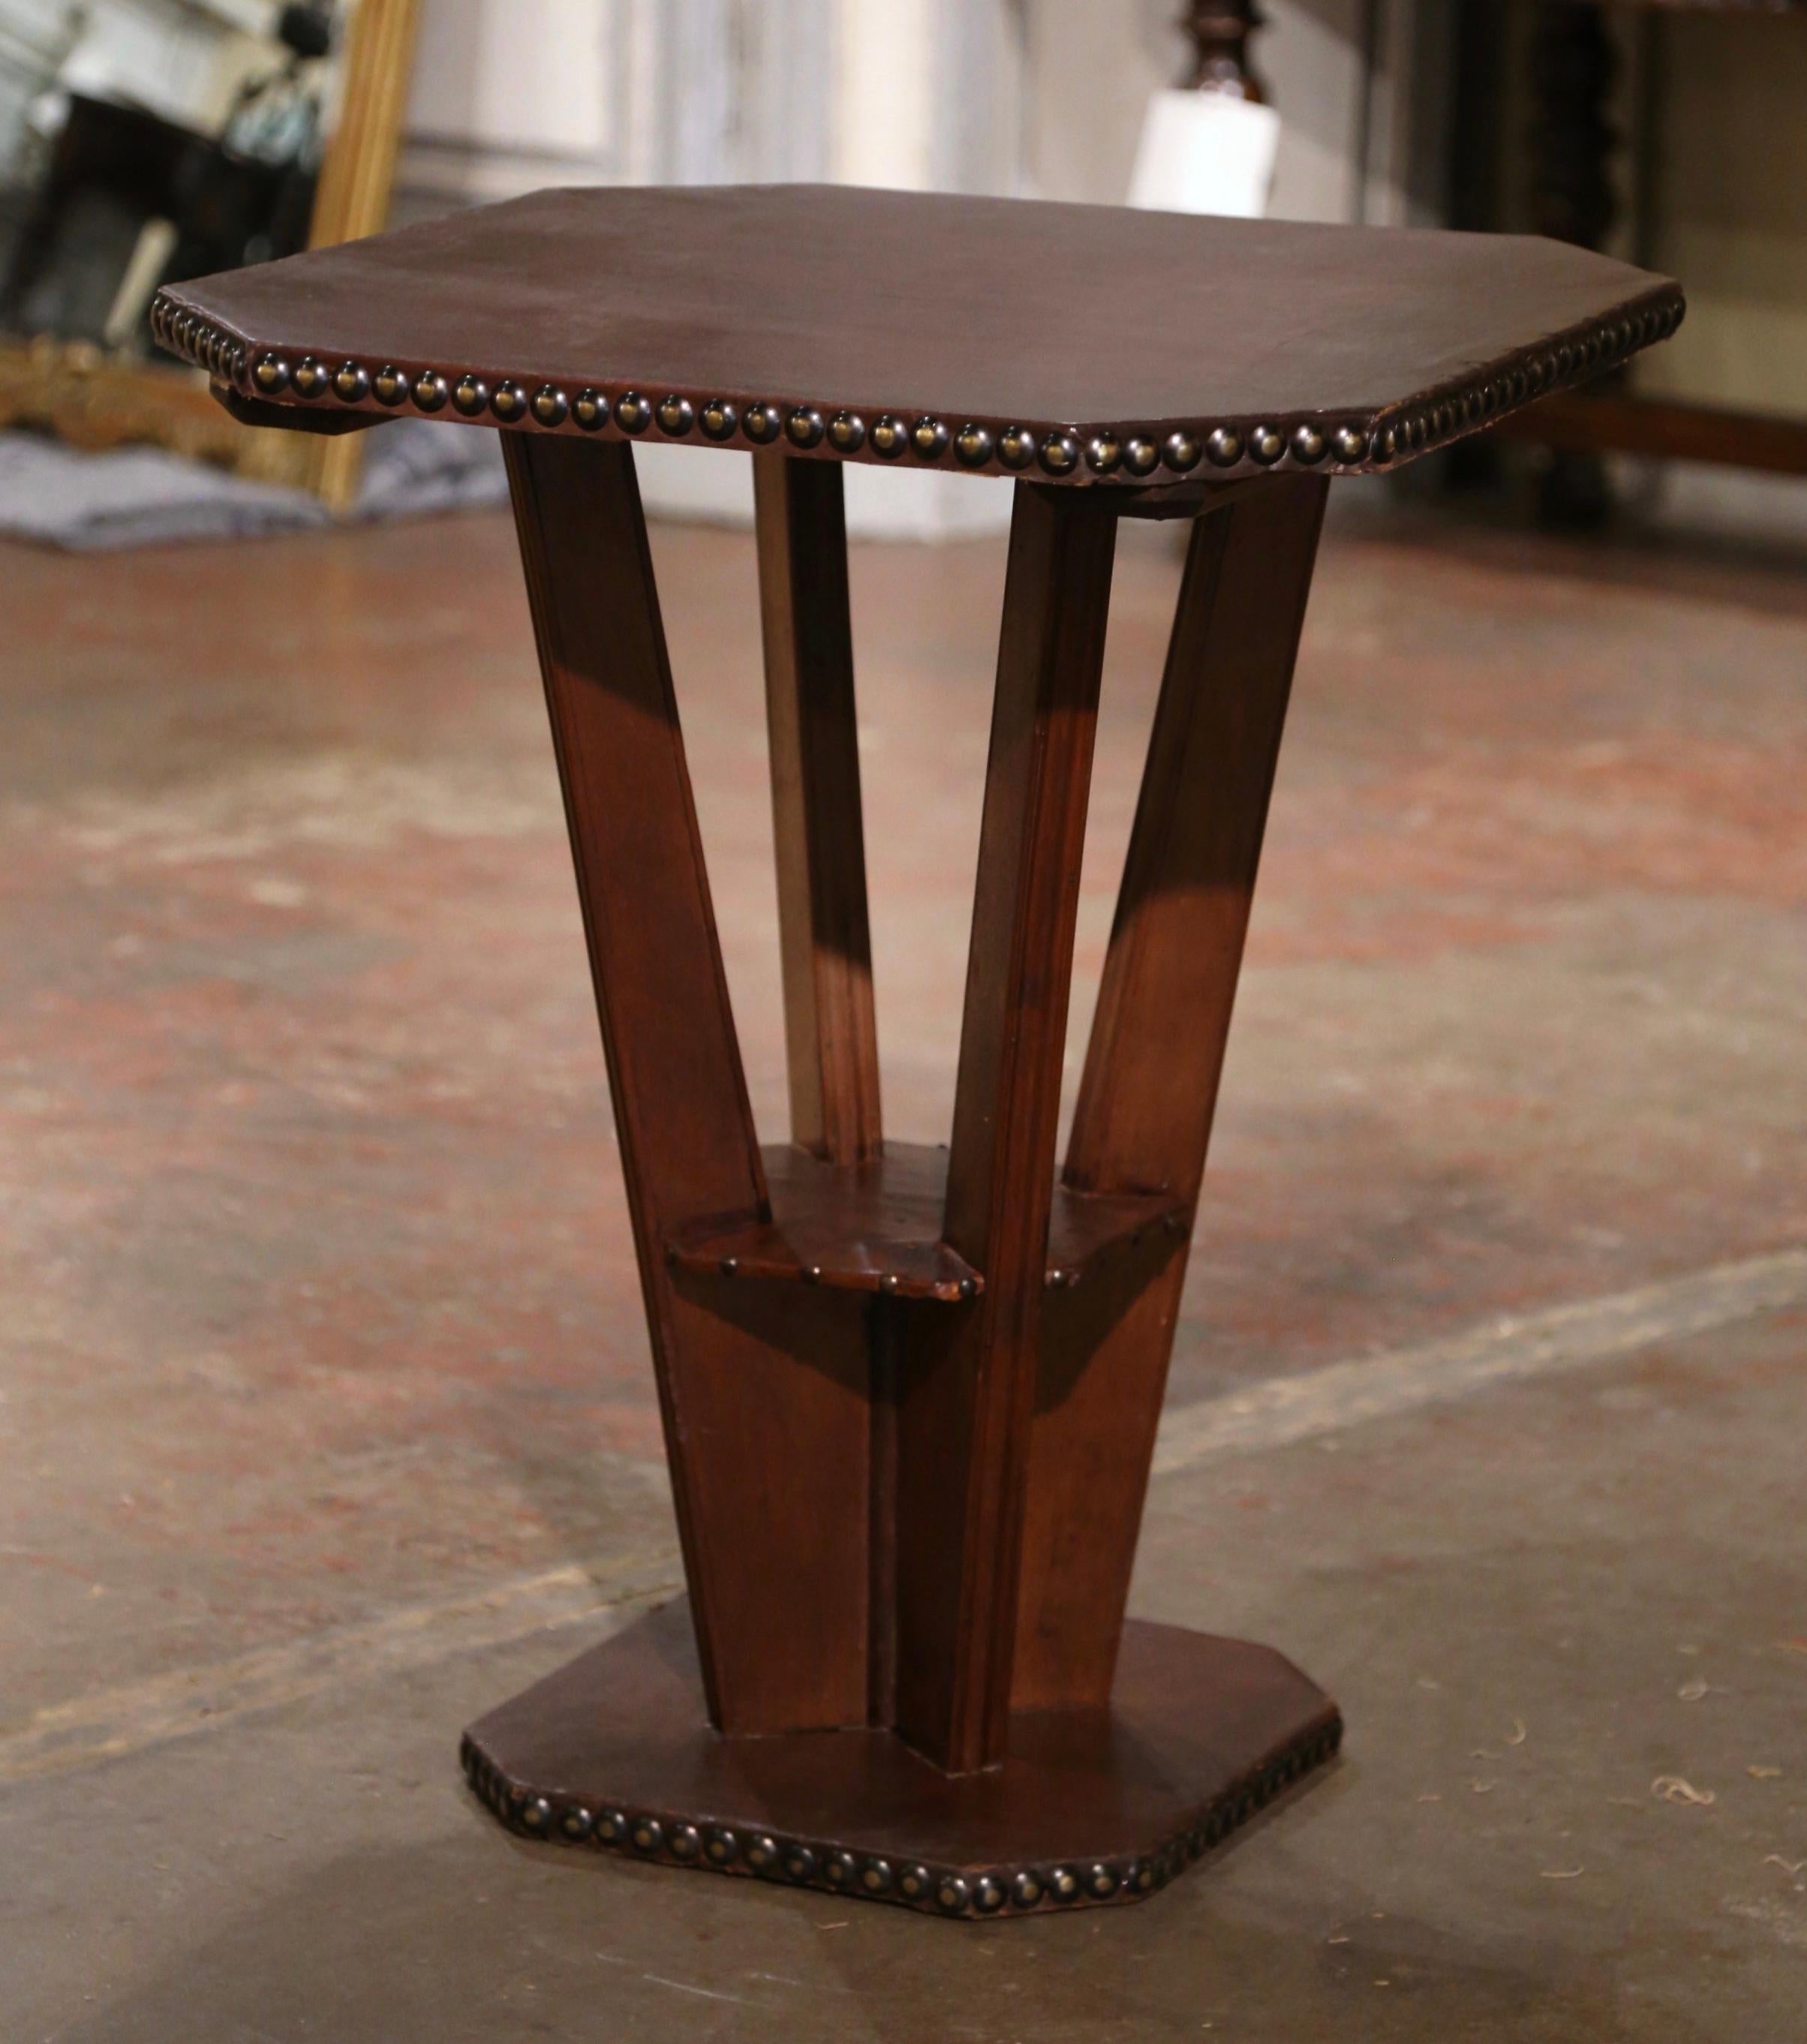 Decorate a den or an office with this elegant antique side table. Crafted in France circa 1930 and square in shape with cut corners, the gueridon stands on a flat hexagonal base over four post legs. The table is upholstered with a patinated brown